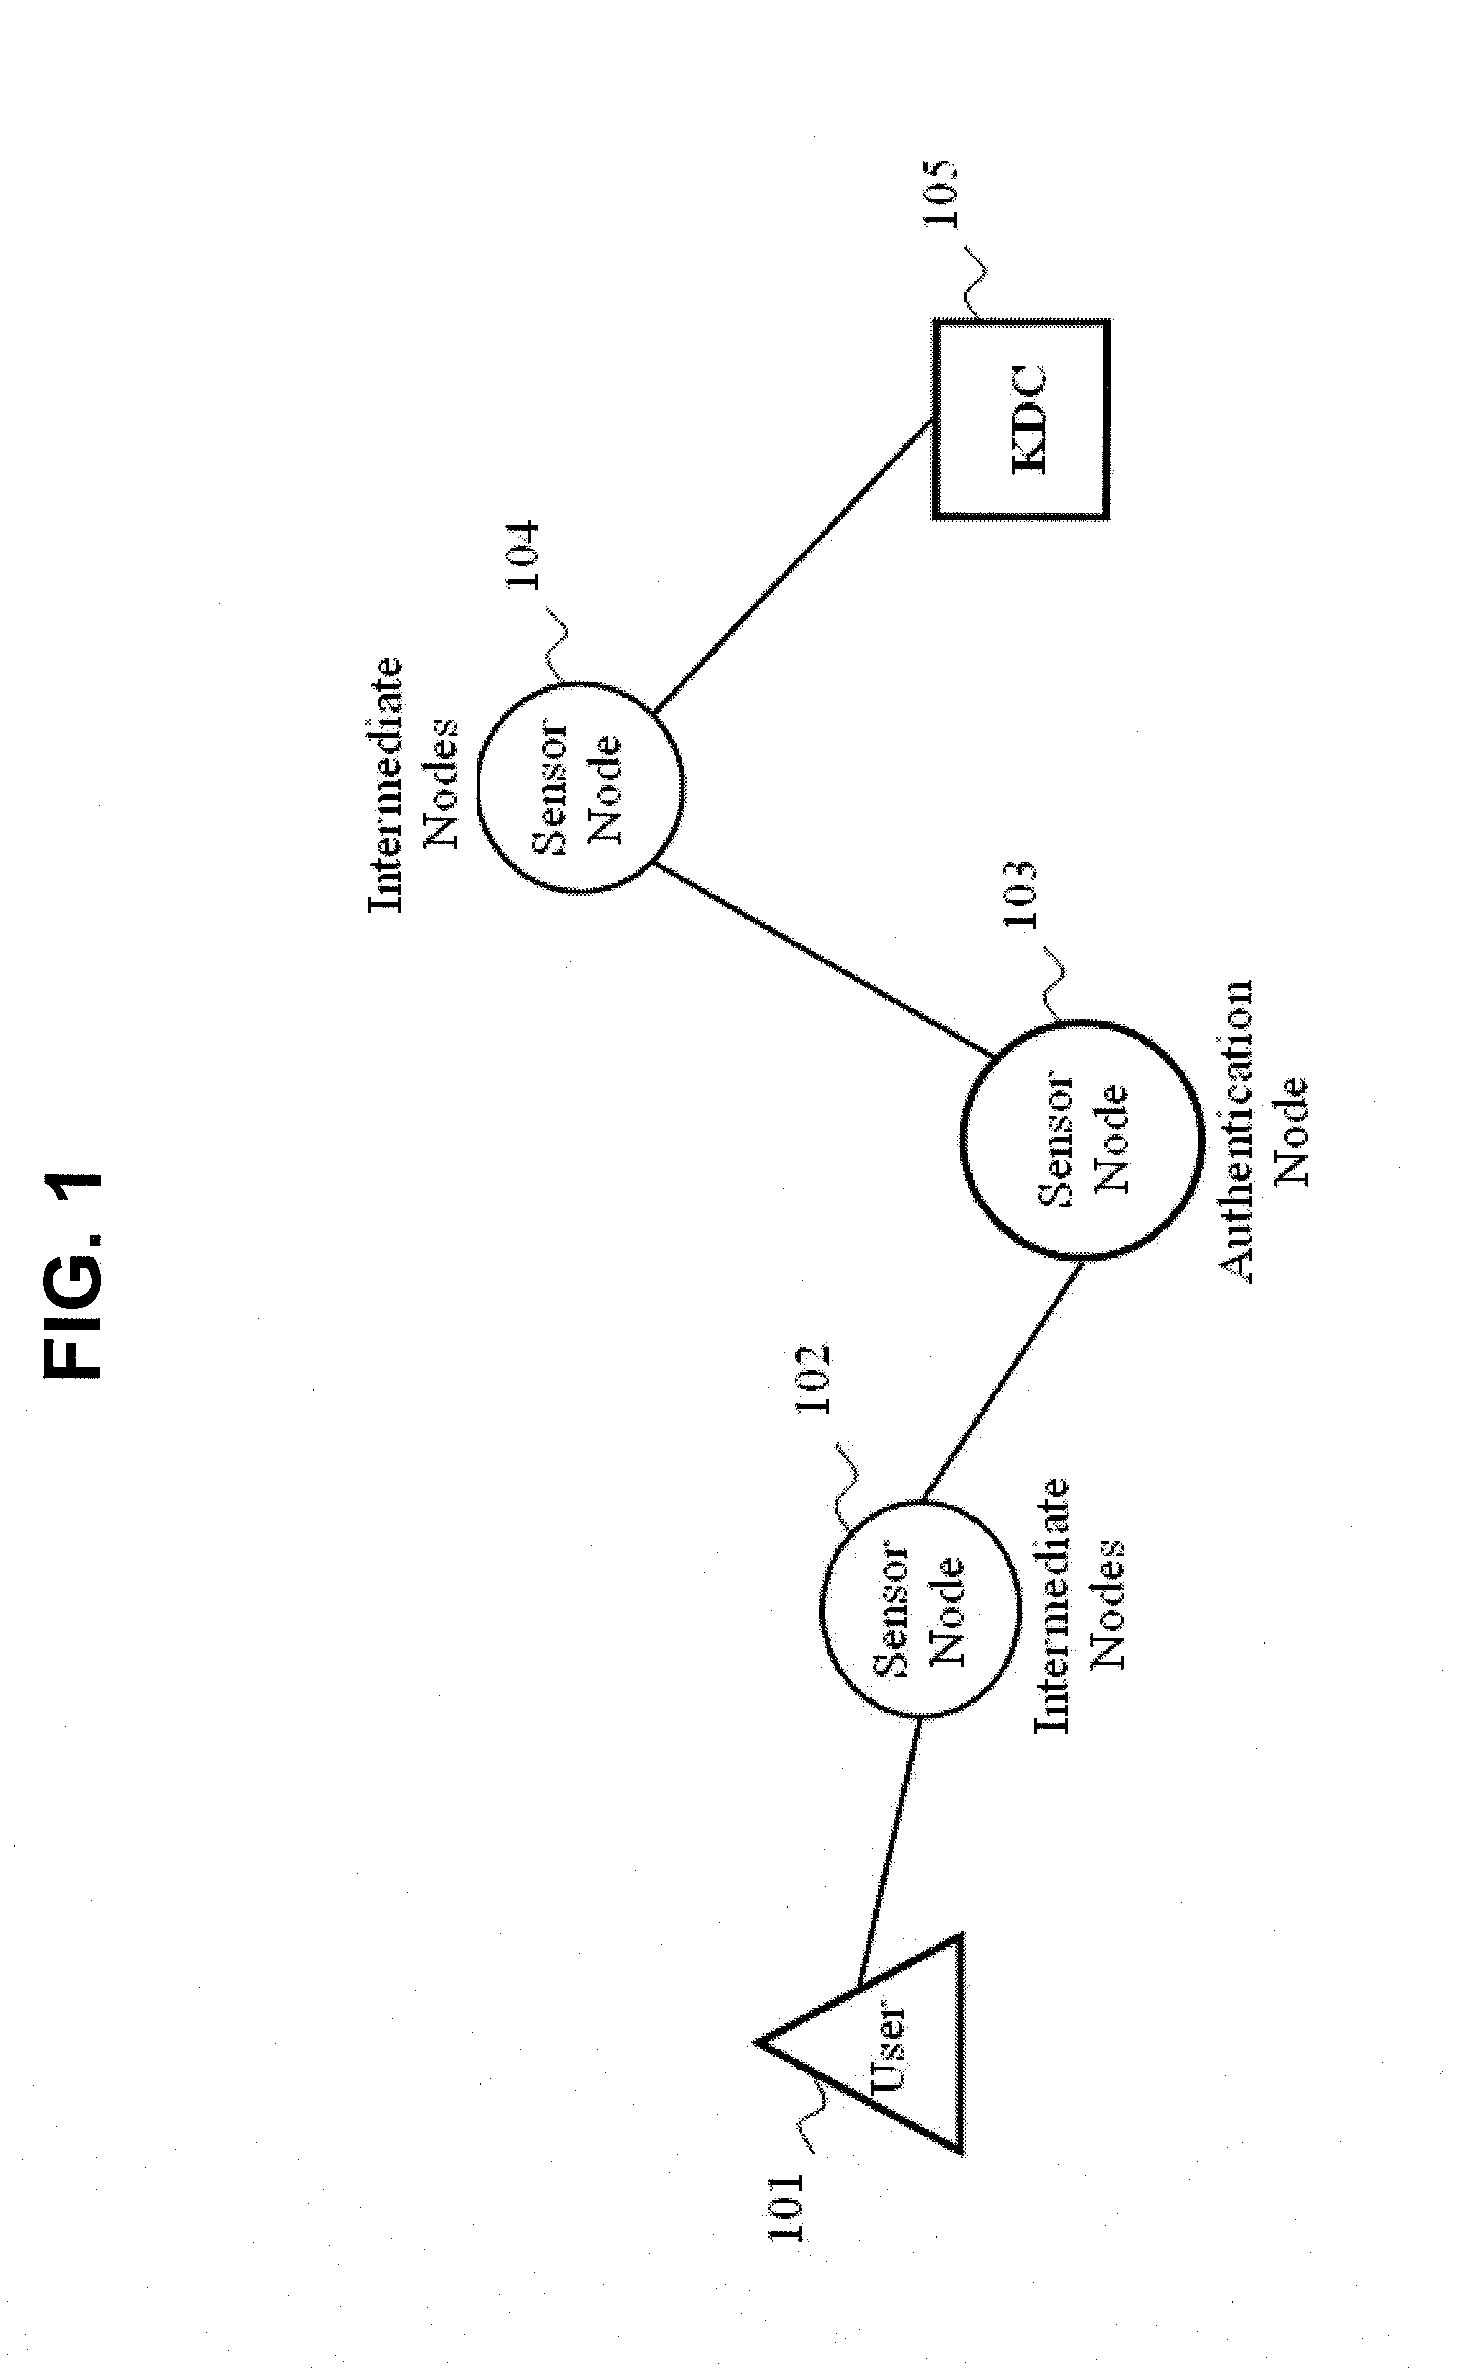 Method for controlling user access in sensor networks